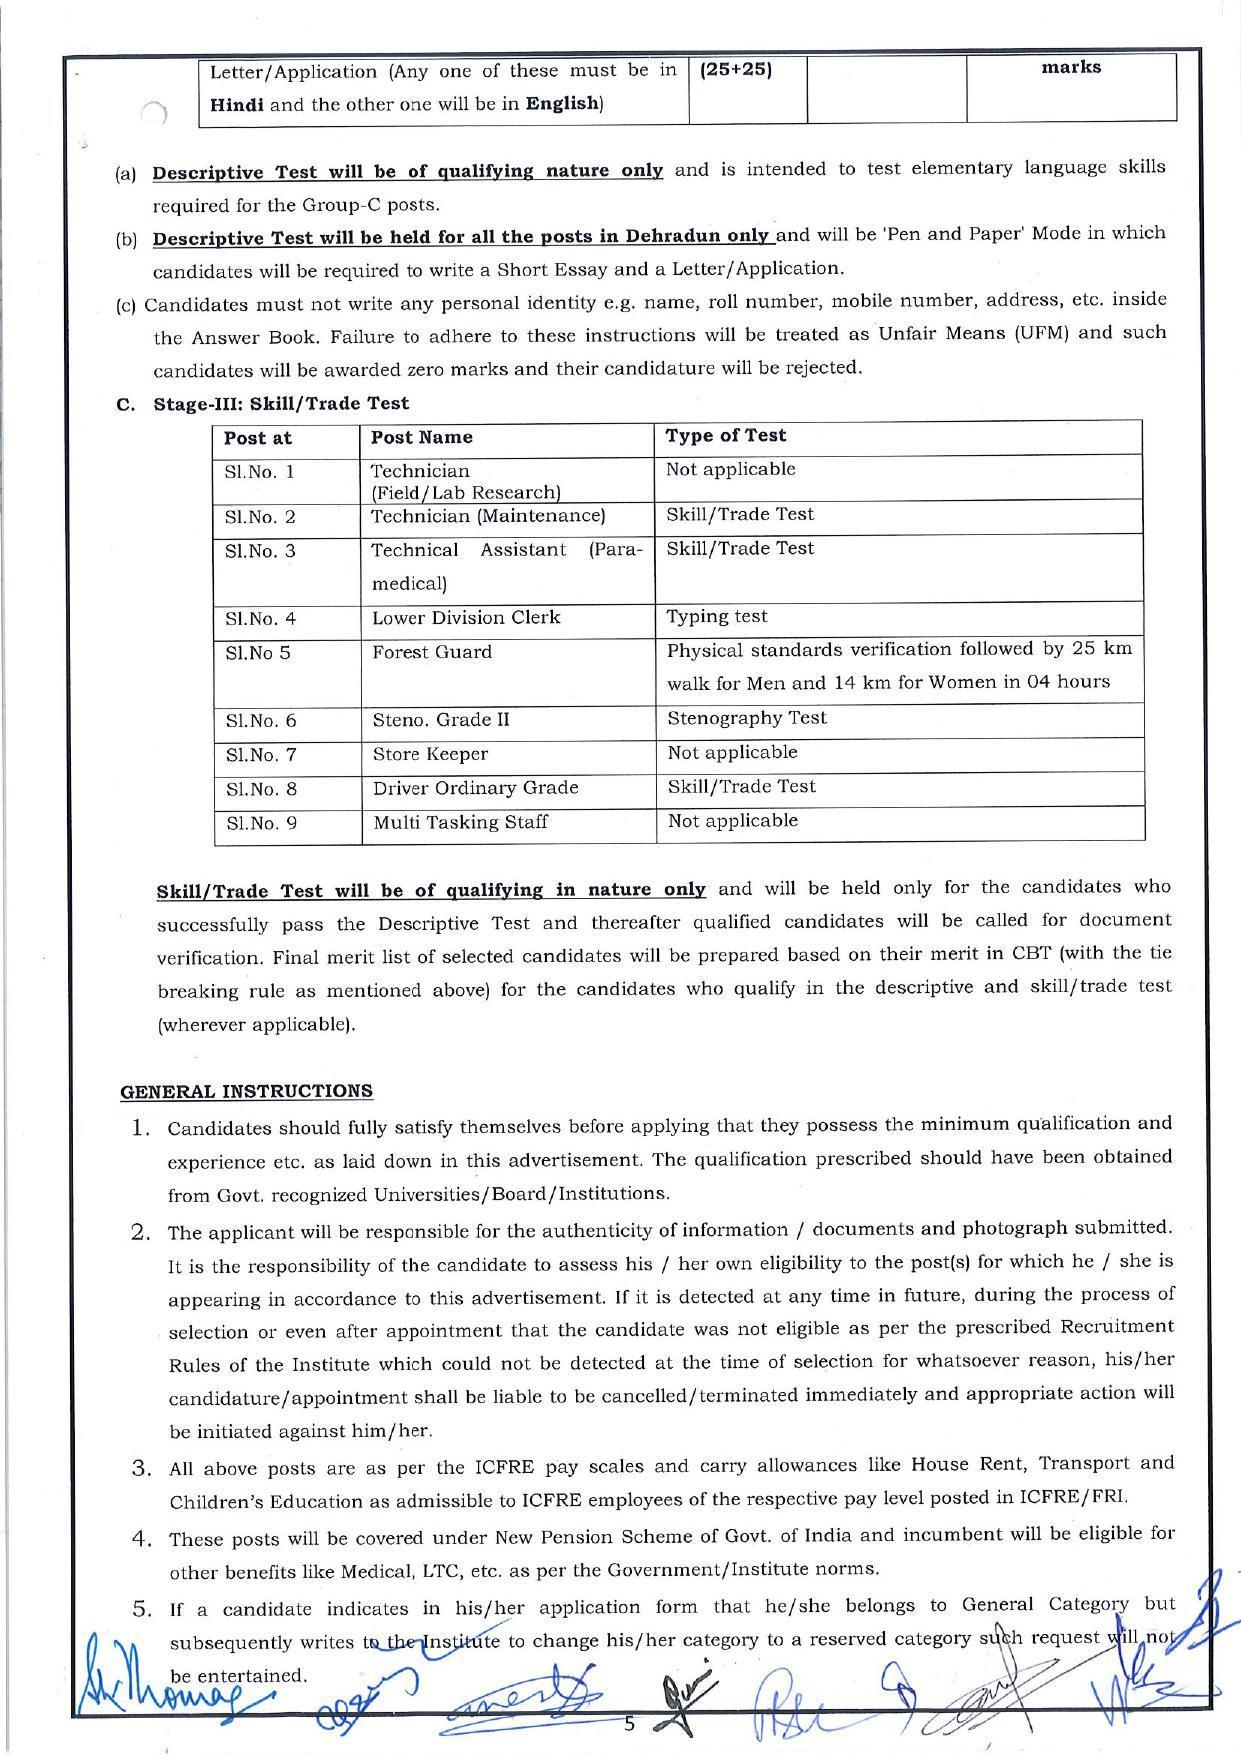 Forest Research Institute Dehradun (FRI Dehradun) Invites Application for 72 MTS, LDC and Various Posts - Page 10